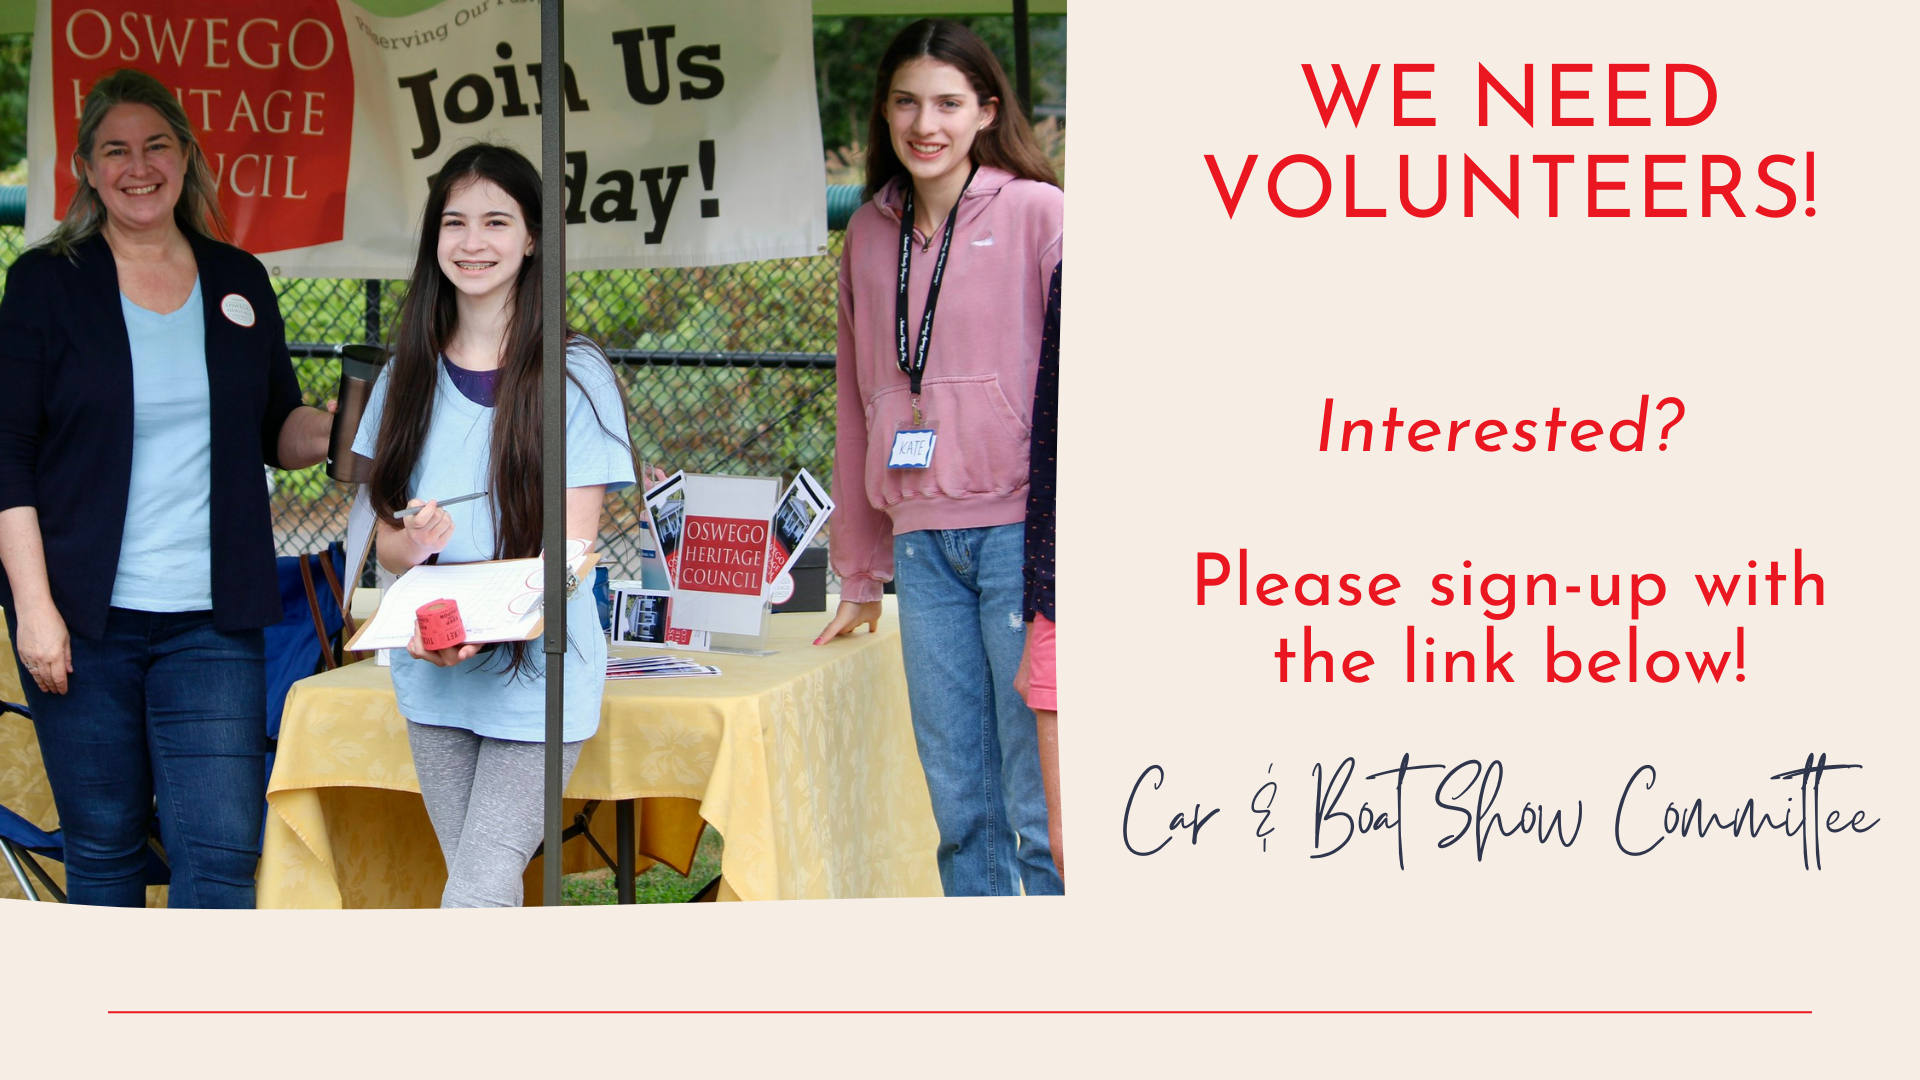 We need volunteers! Interested? Please sign-up with the link below! Car & Boat Show Committee. Image to the left is of National Charity League volunteers from last year at the Oswego Heritage Council's booth.